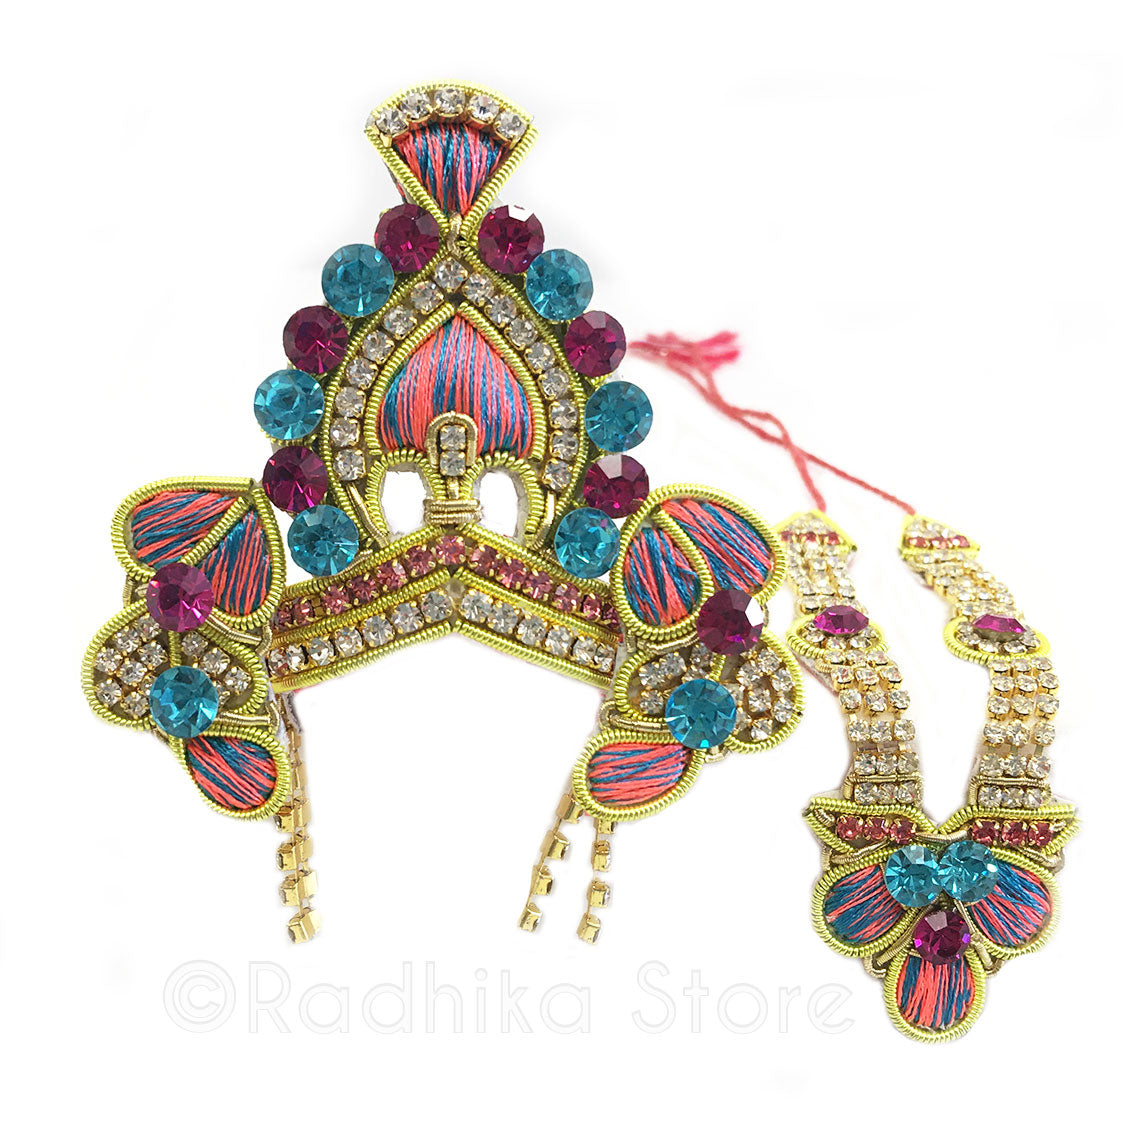 Braja - Deity Crown and Necklace Set -With Earrings - Peach-Teal and Fuchsia